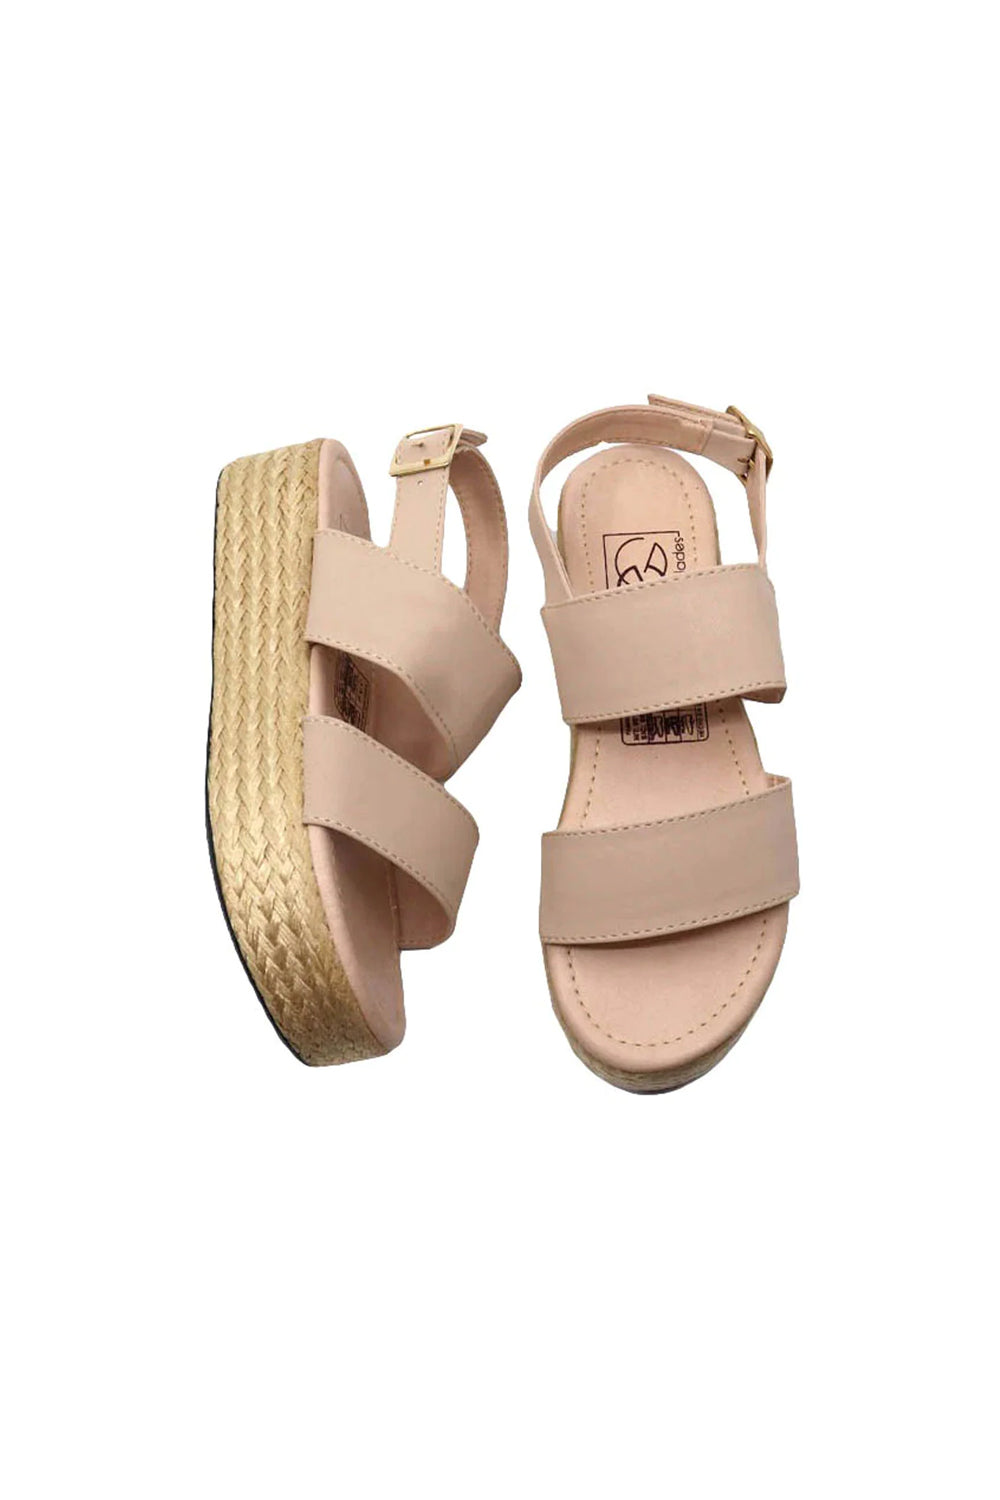 Yute 2 Flat Sandals for Women   Brown